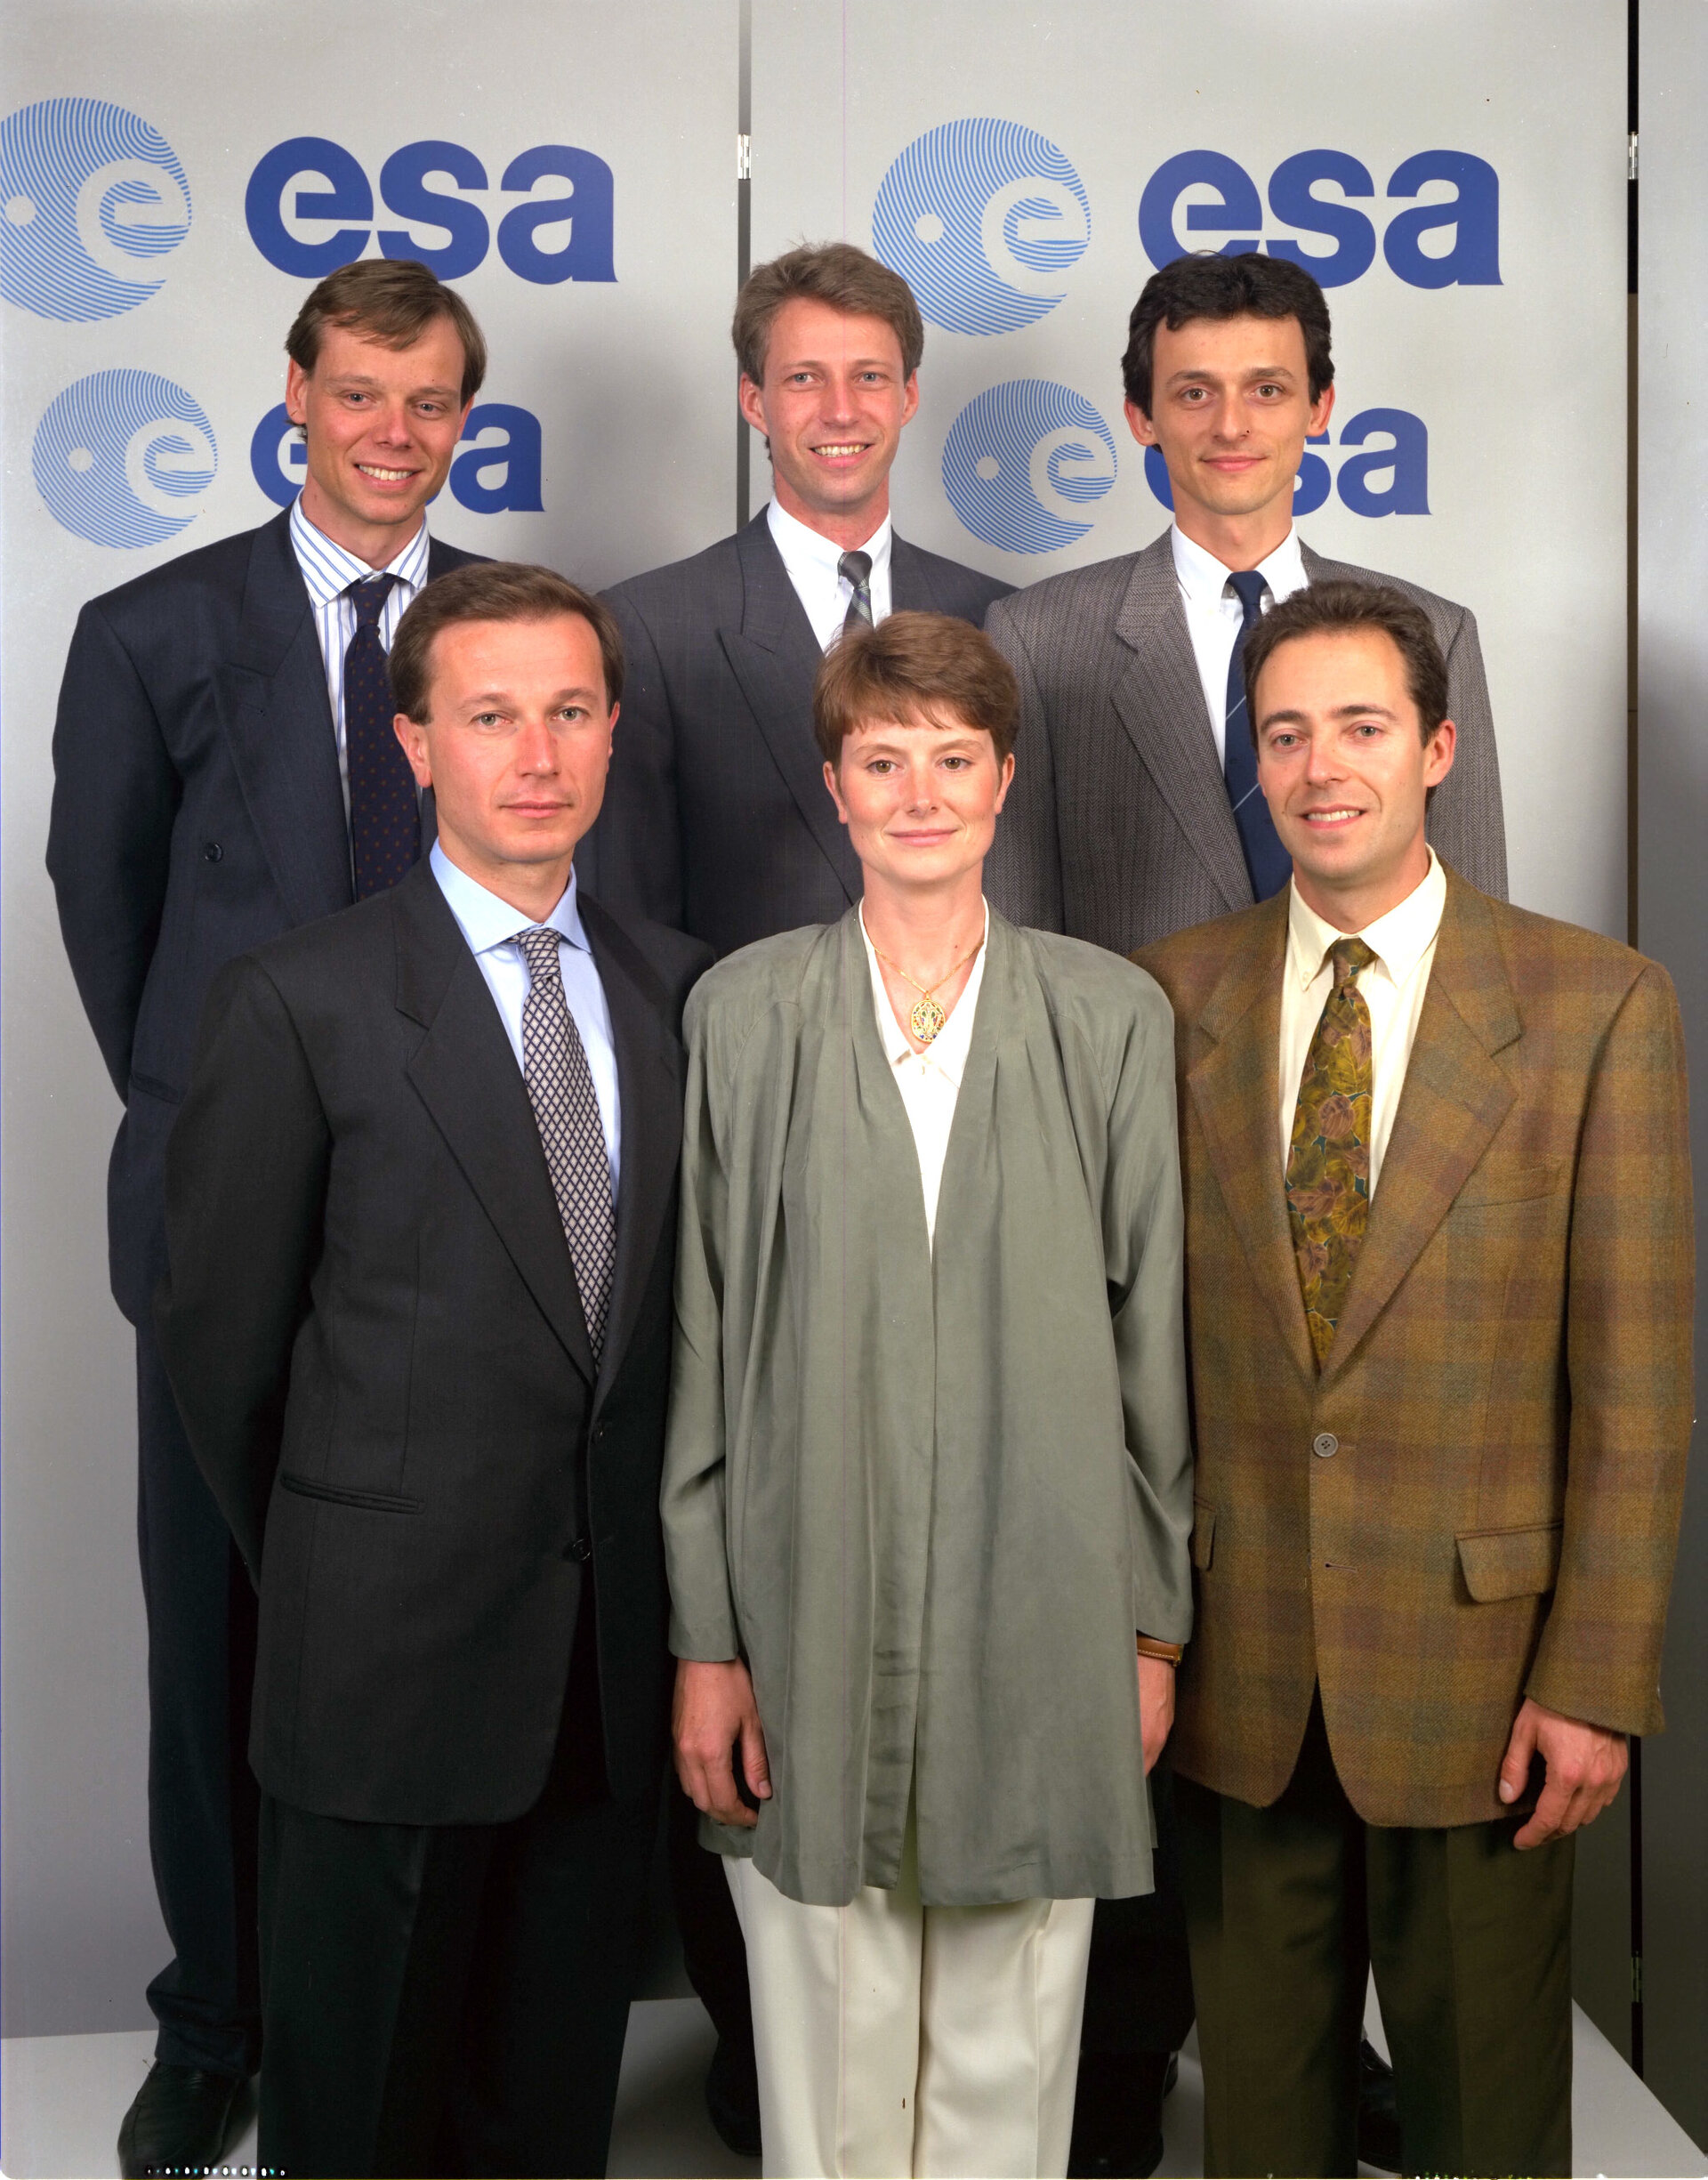 Six new ESA astronauts were selected in 1992